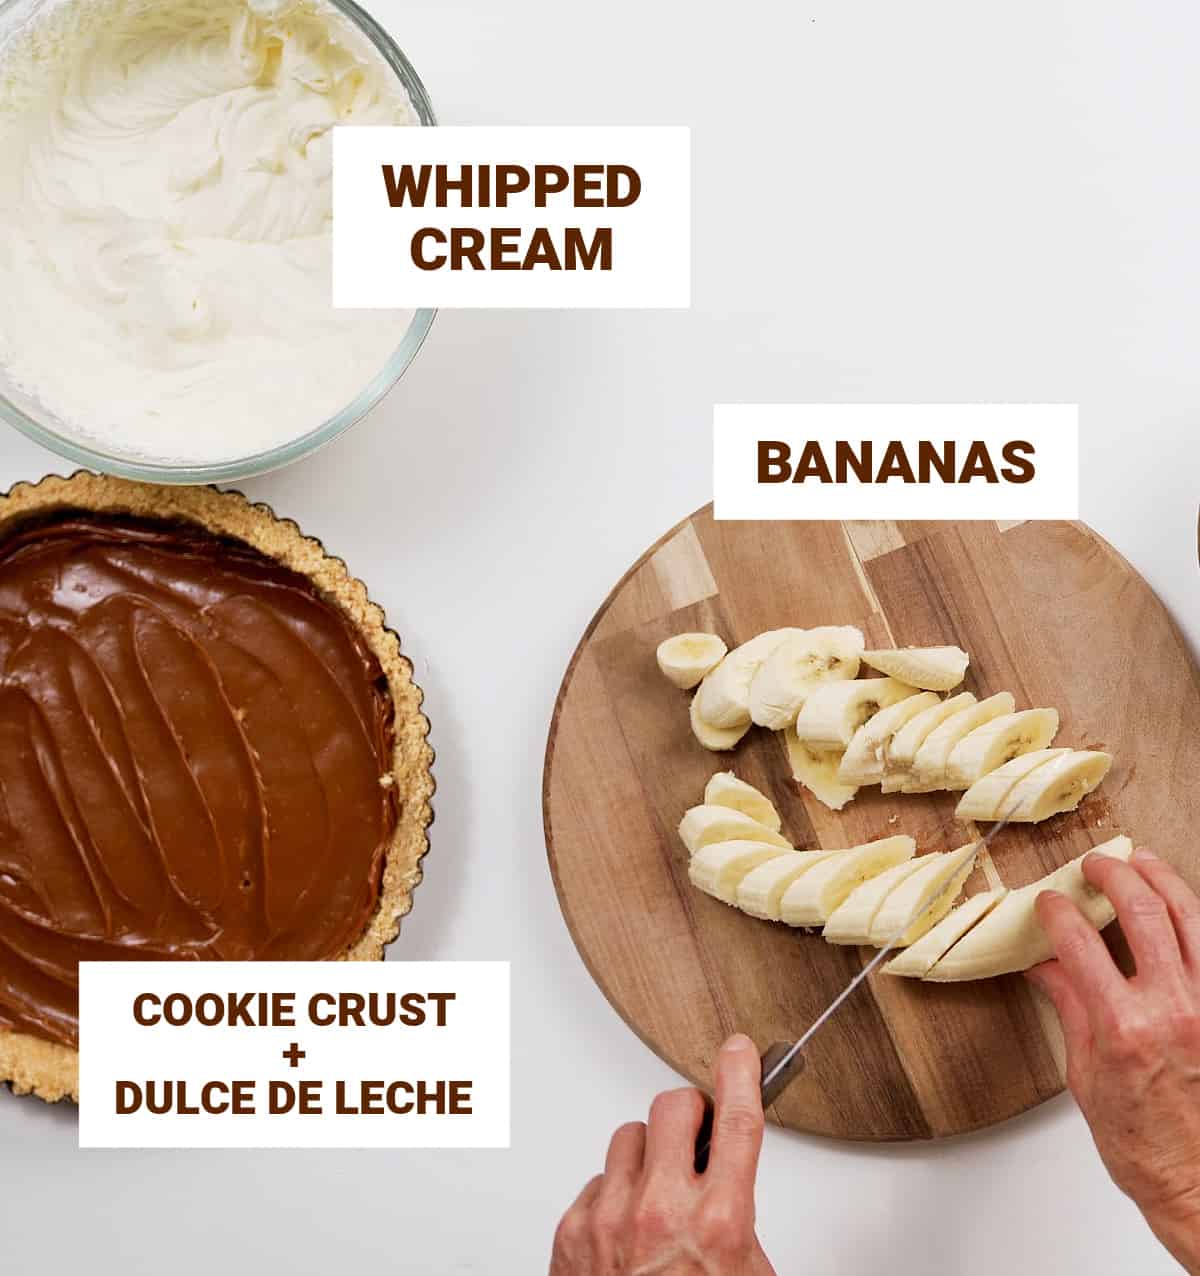 Top view of hands slicing bananas on wooden board, pie with dulce de leche, whipped cream in bowl; text overlays